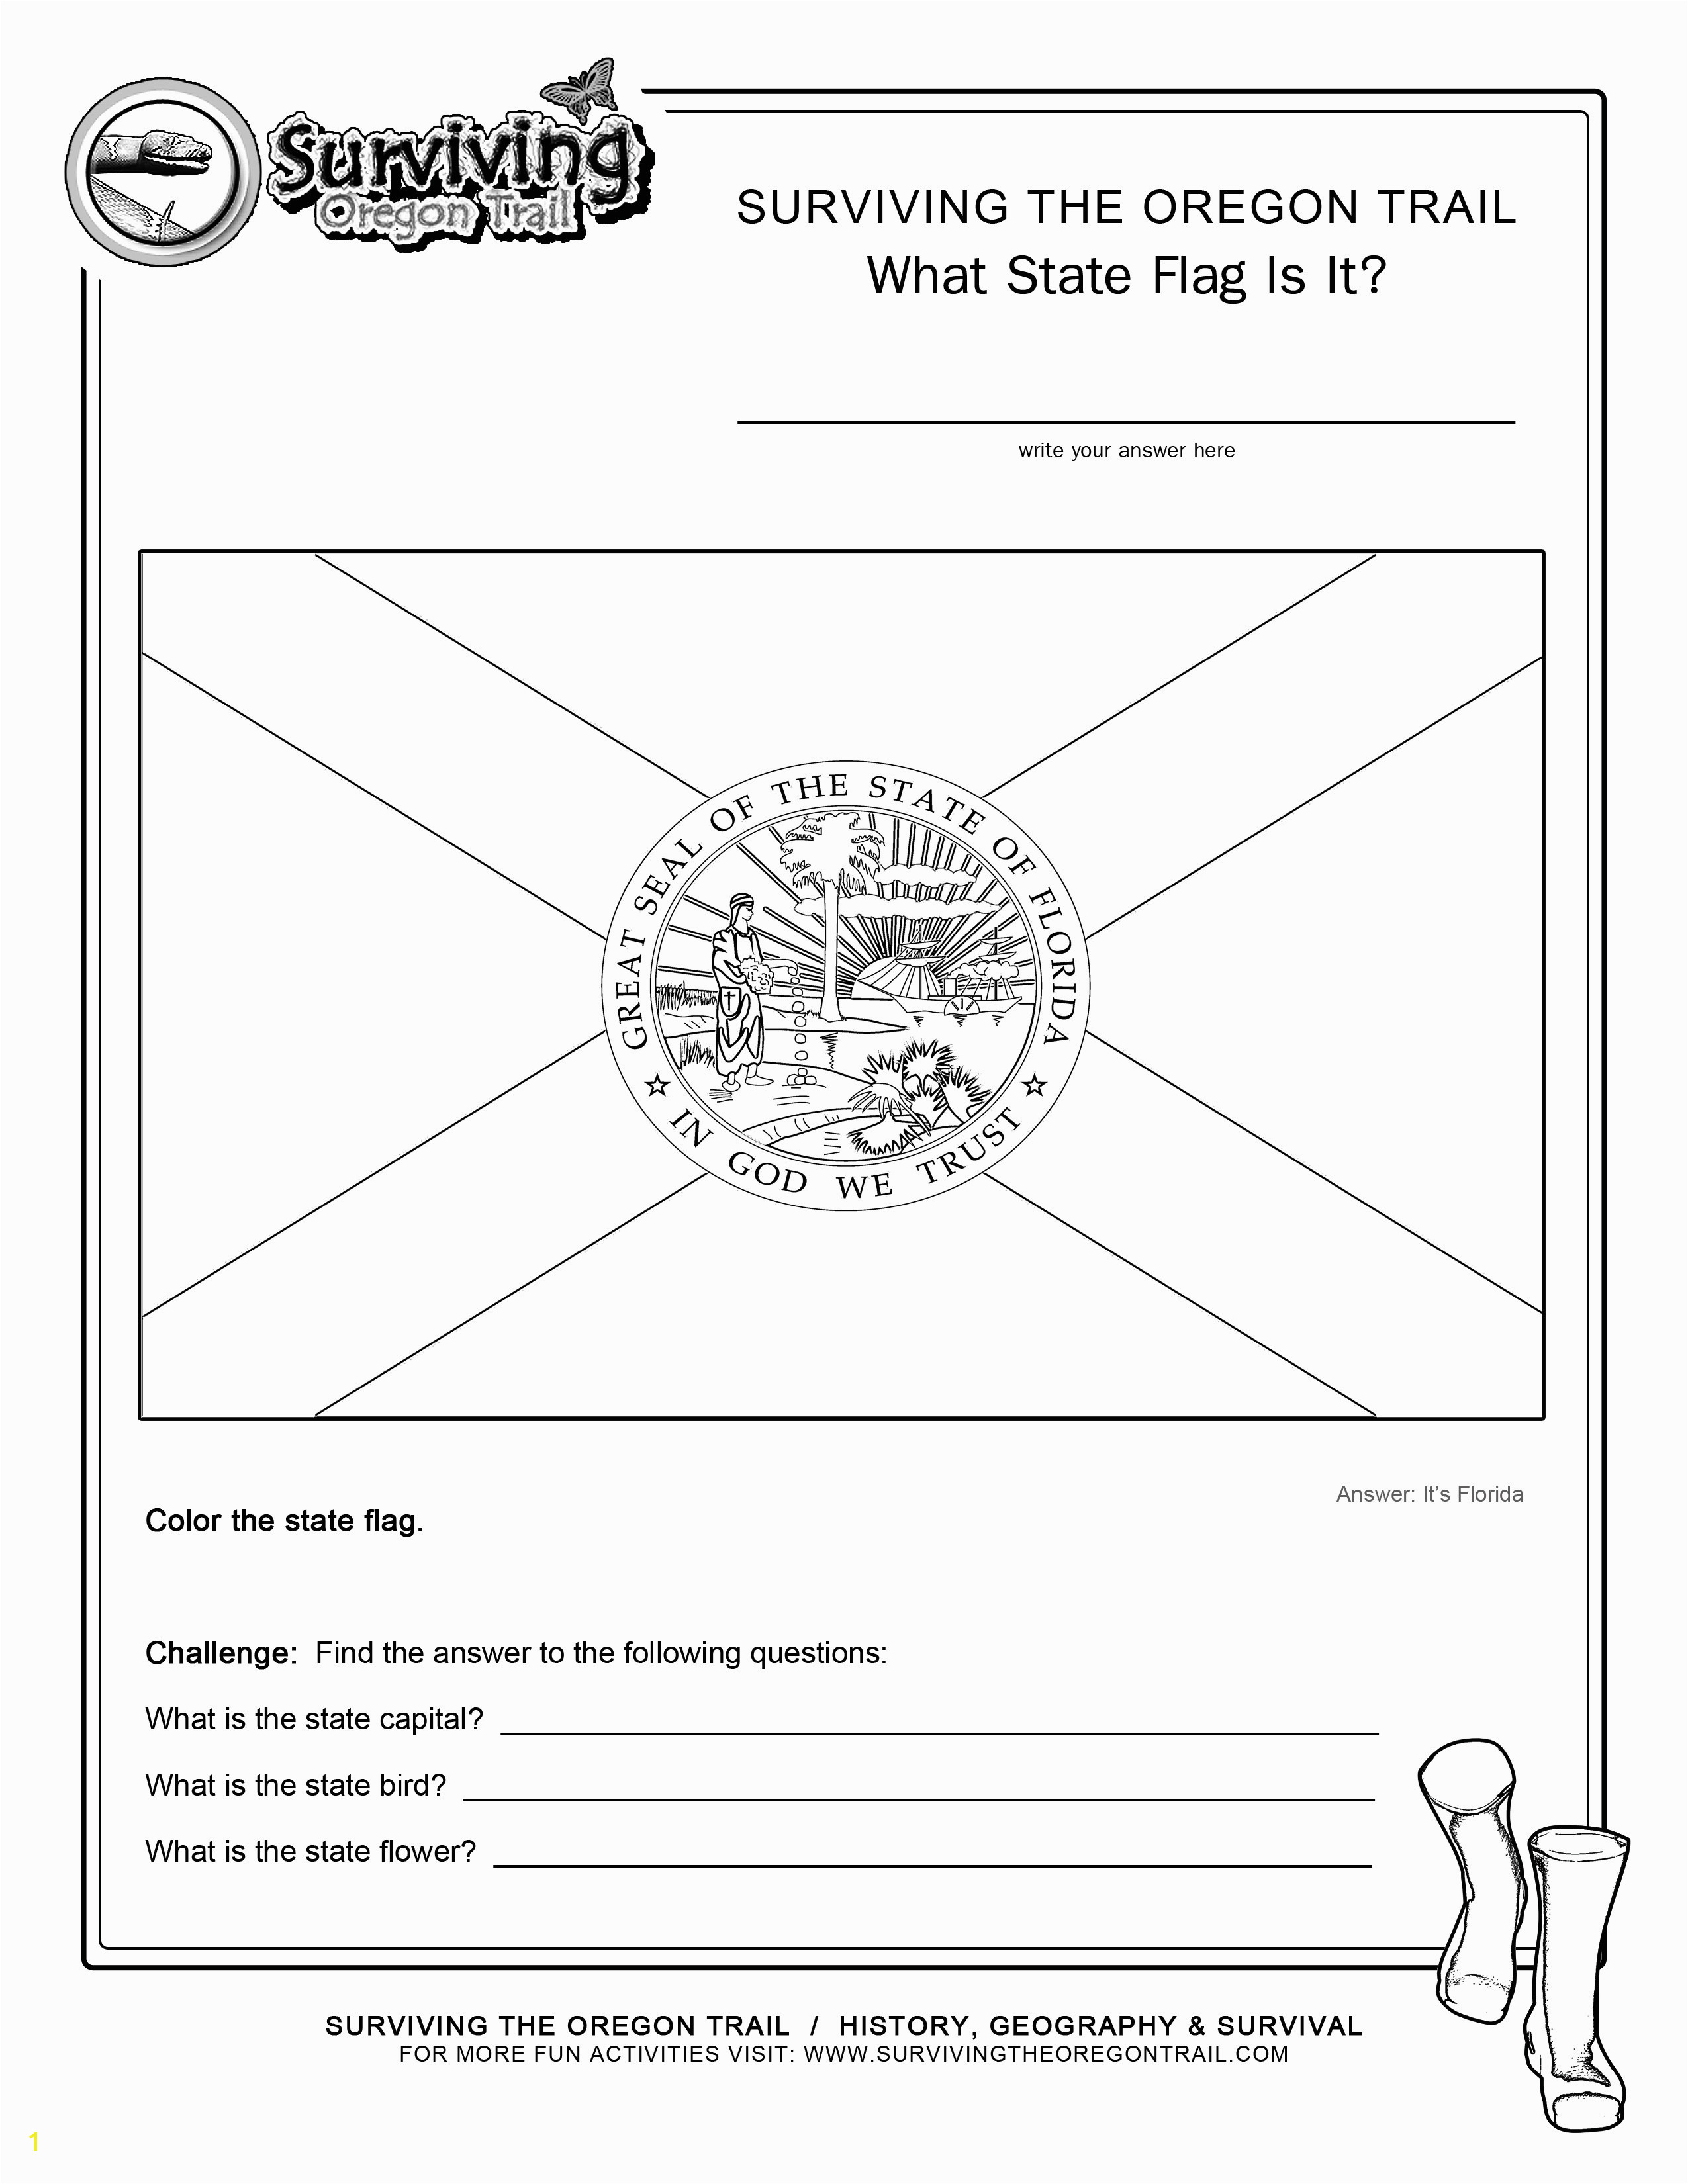 Delaware Flag Coloring Page Delaware State Flag Coloring Page Coloring Pages Coloring Pages